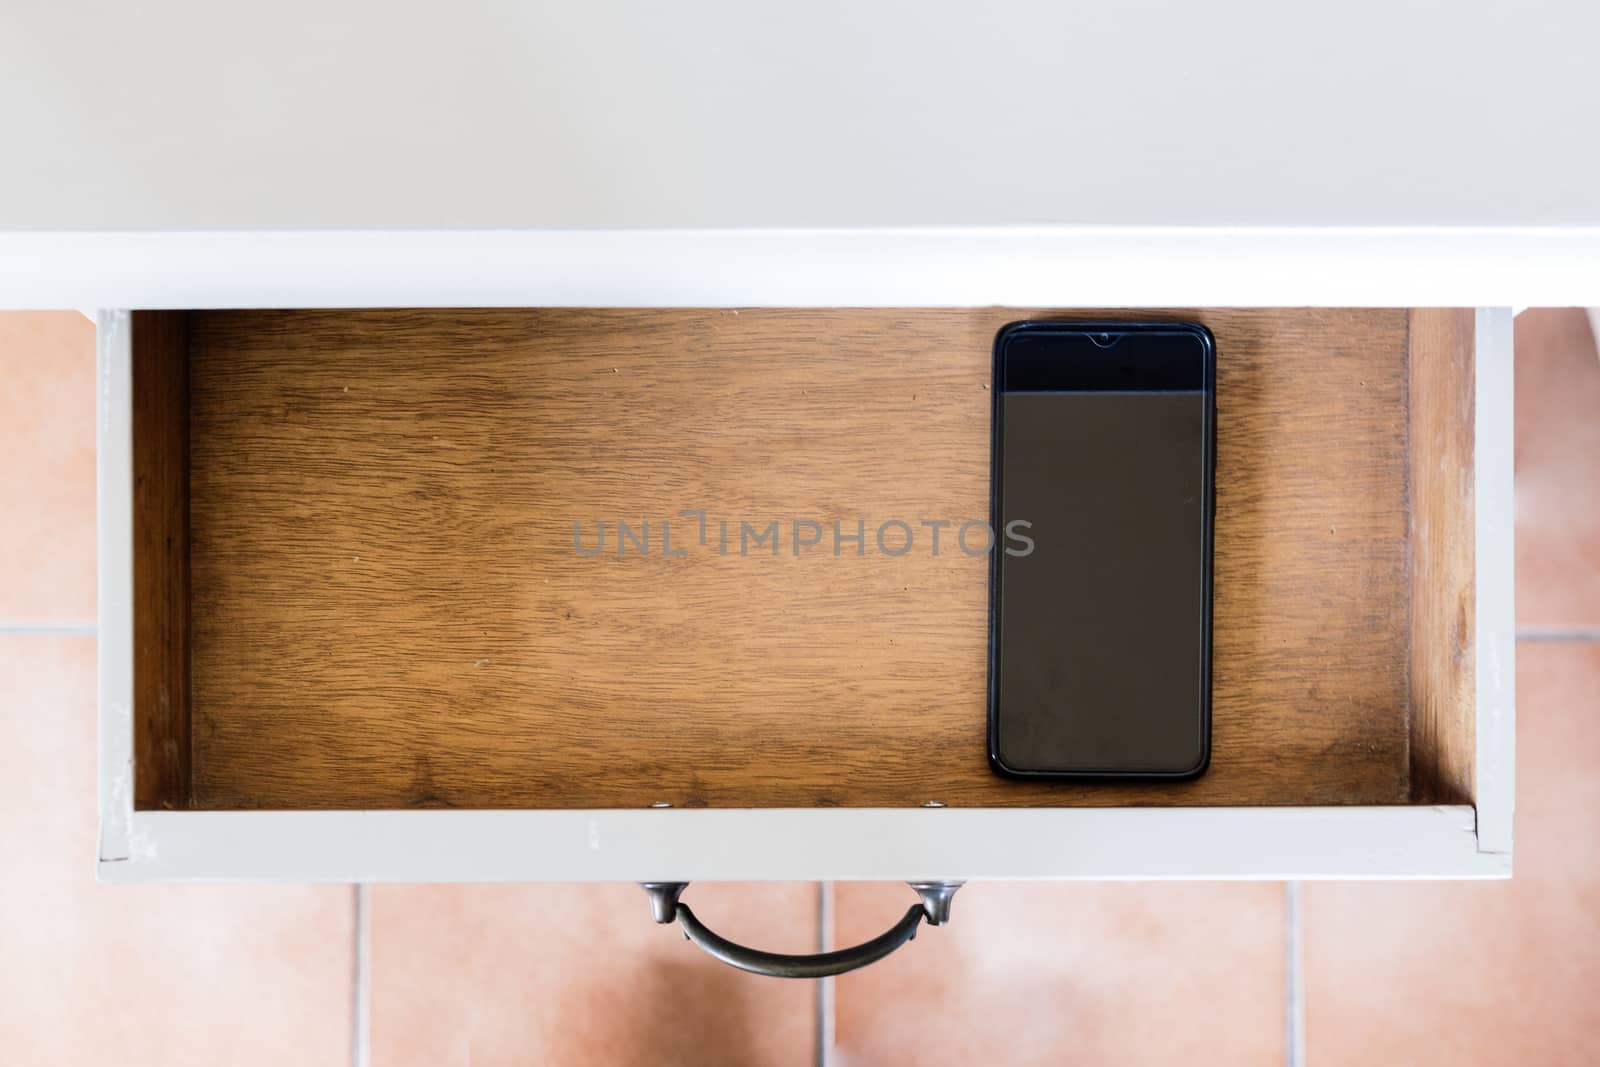 Mobile phone stored on a bedside table by Daniel_Mato